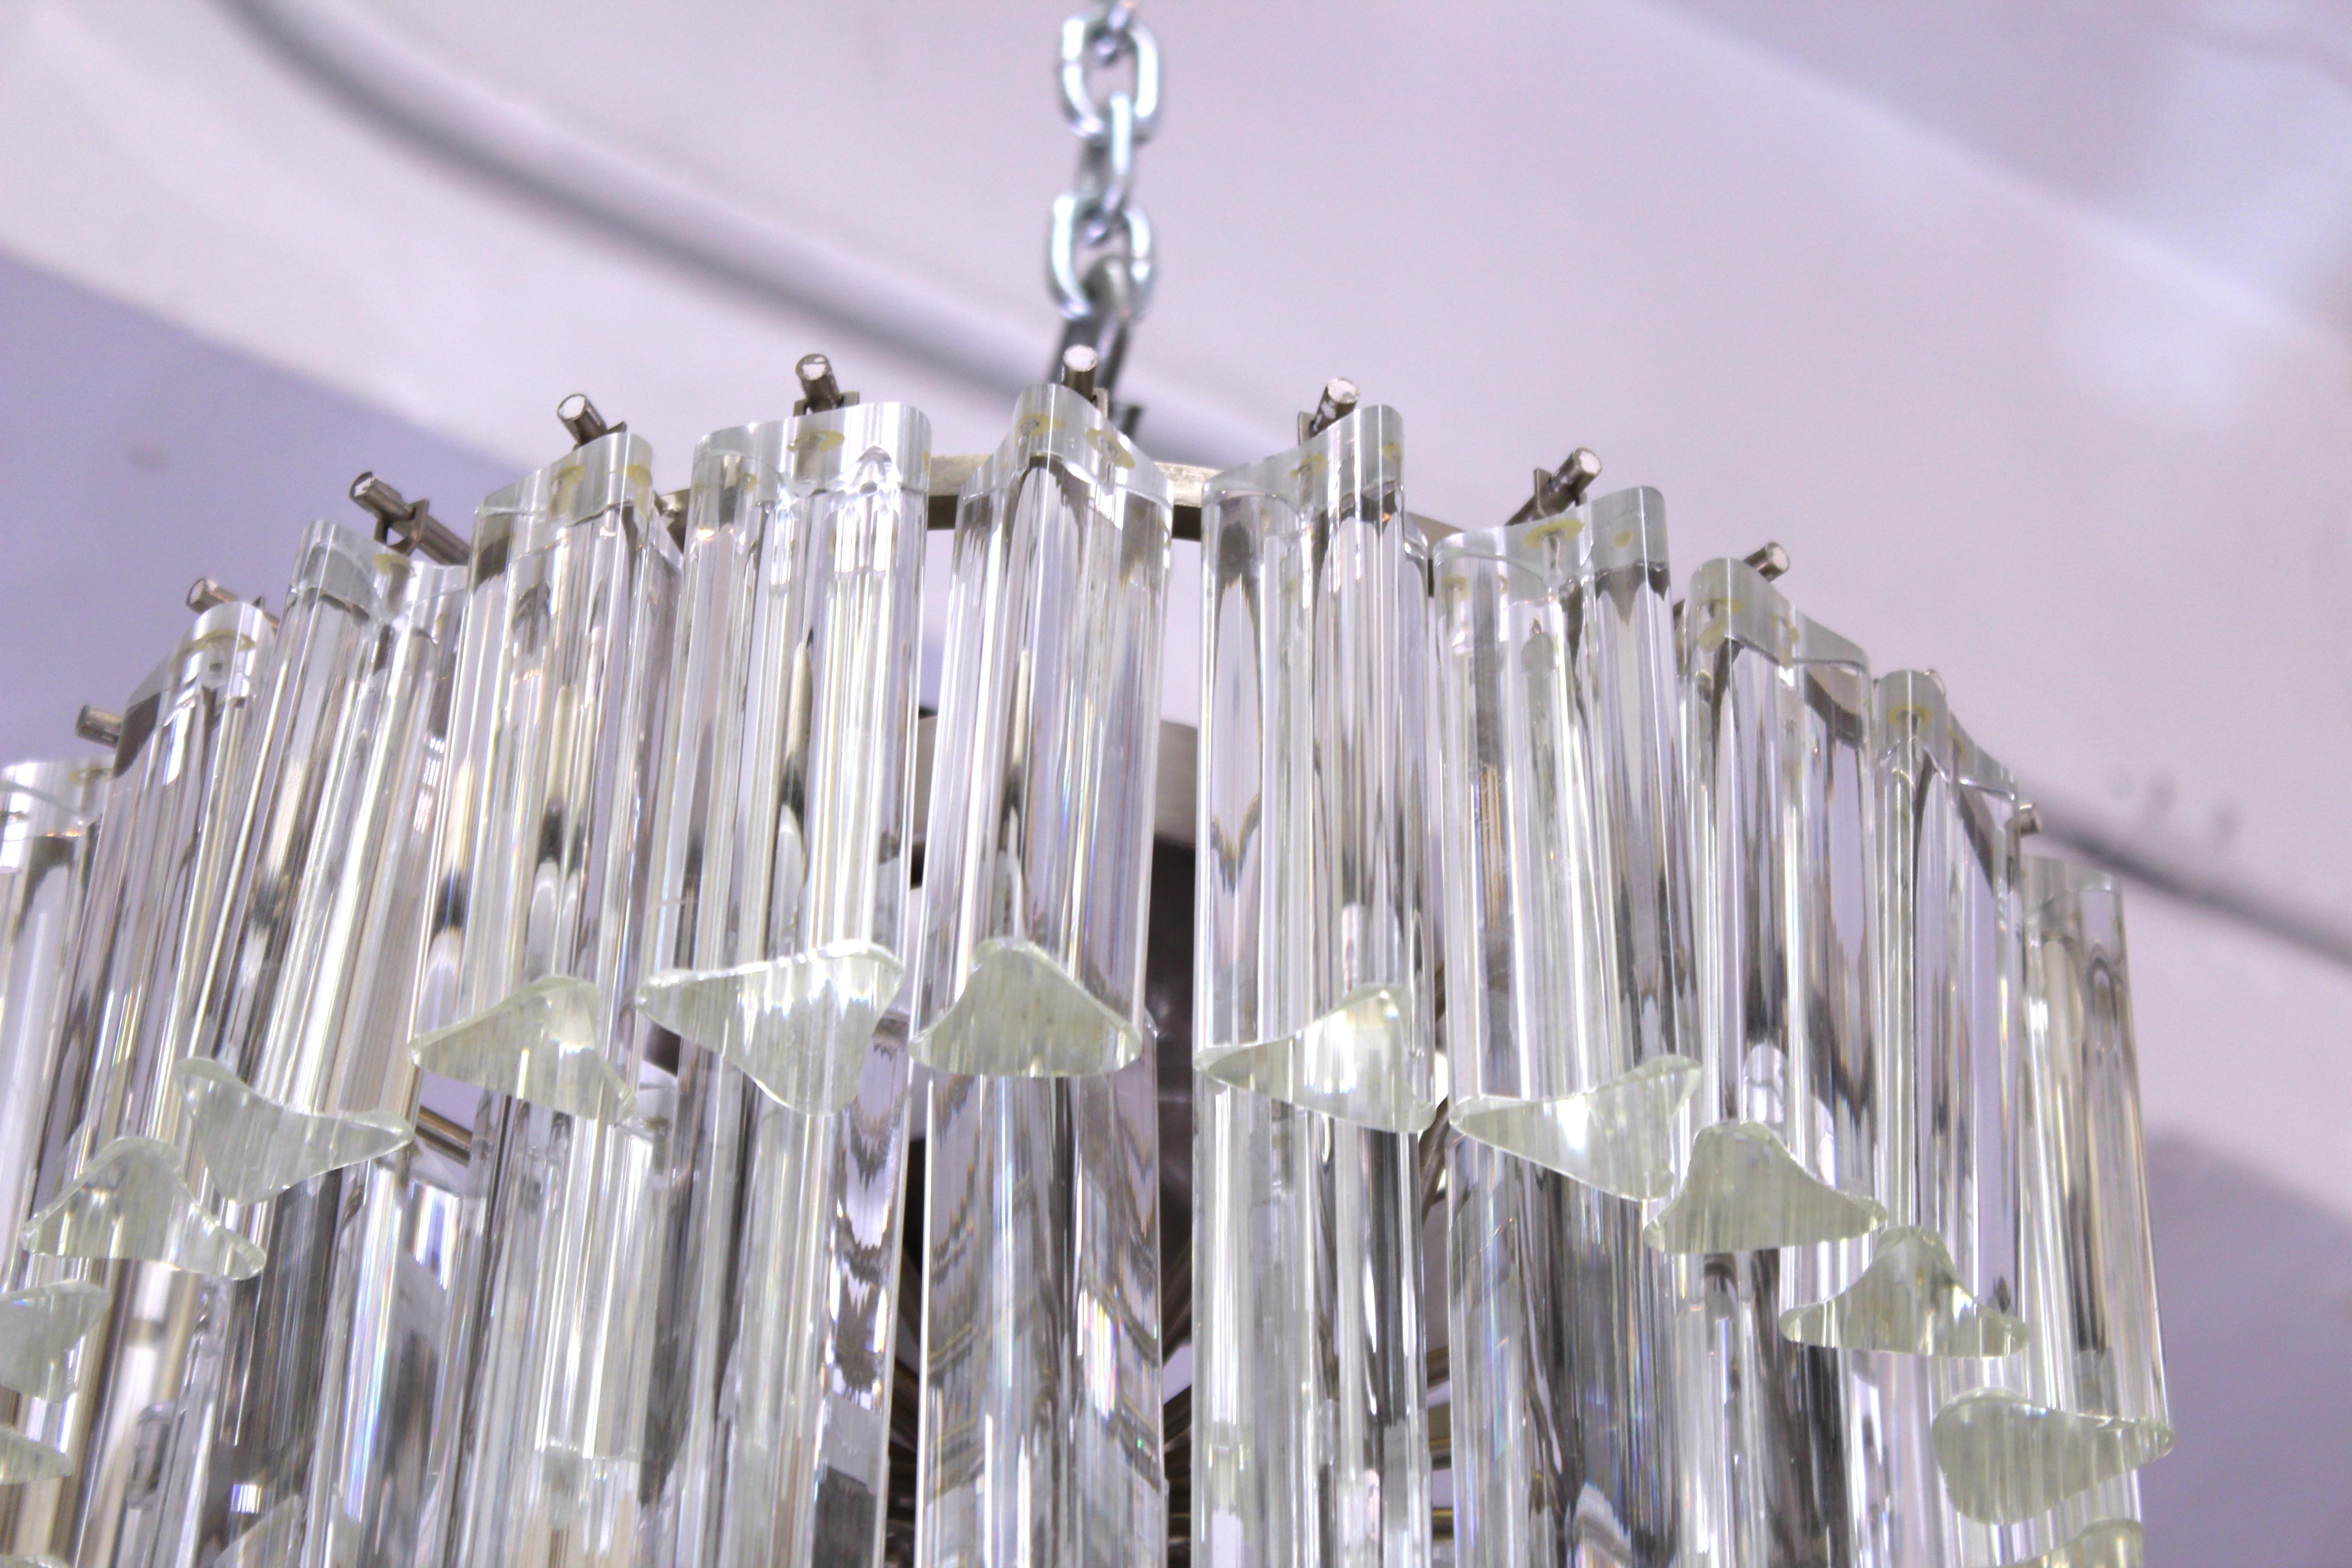 Italian modern glass prism chandelier by Venini, made of multiple tiers of triedri glass prisms. The piece is in great vintage condition with age-appropriate wear.
Also available as a pair.